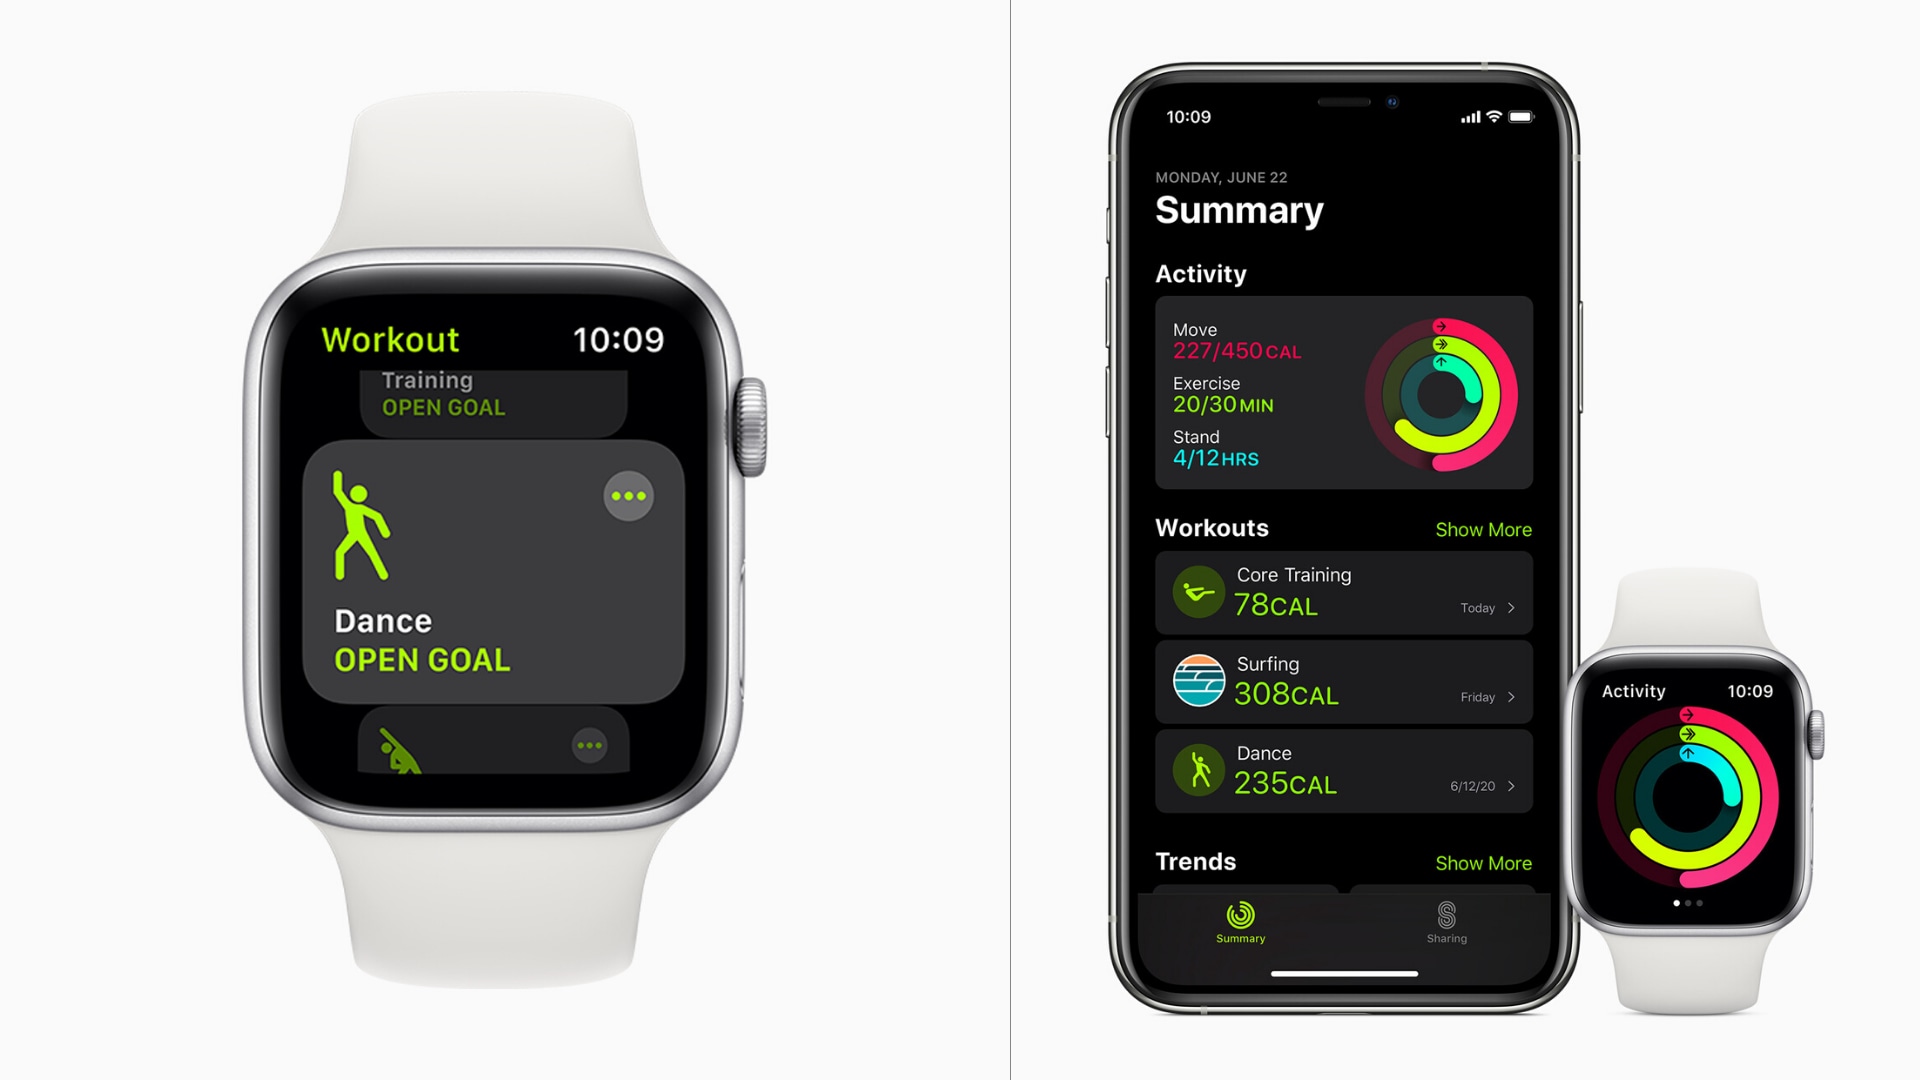  How to track beachbody workouts on apple watch for Fat Body